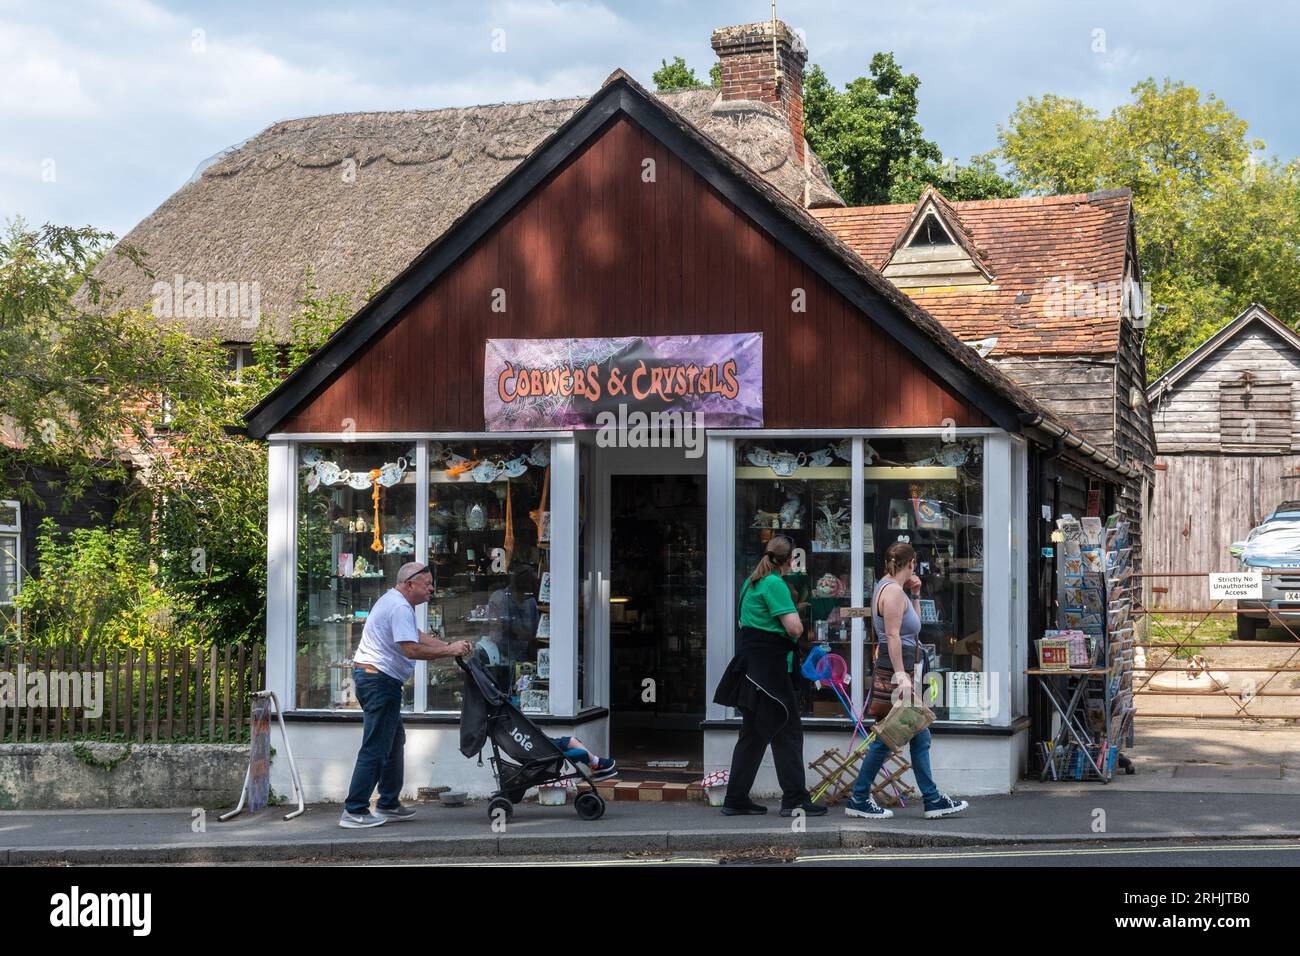 People looking in unusual independent shops in Burley village in the New Forest National Park, Hampshire, England, UK, during summer Stock Photo